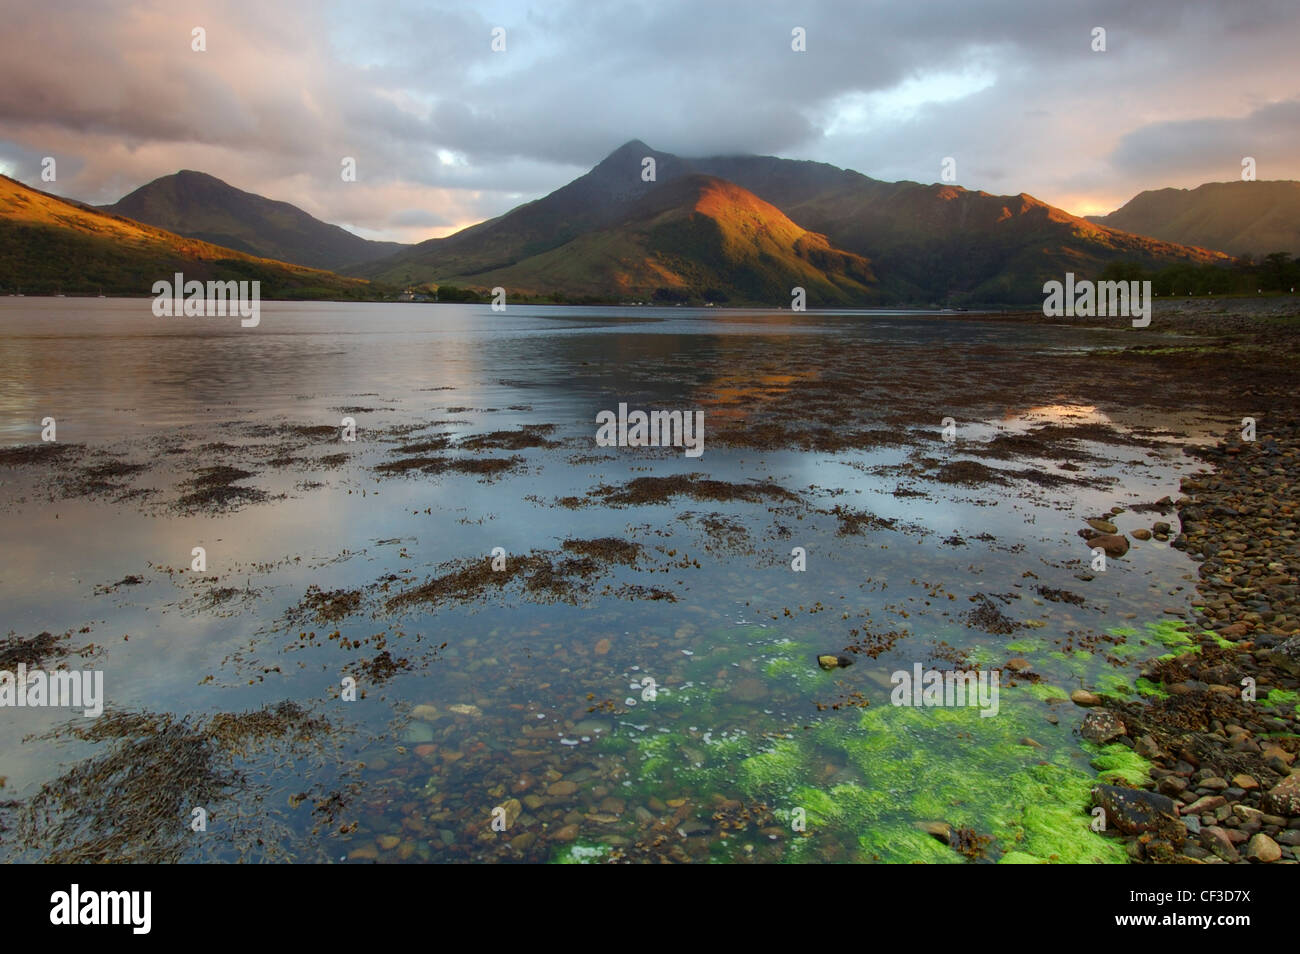 Views across Loch Leven towards Ballaculish and the peaks of Sgorr Bhan and Sgorr Dhonuill. Stock Photo